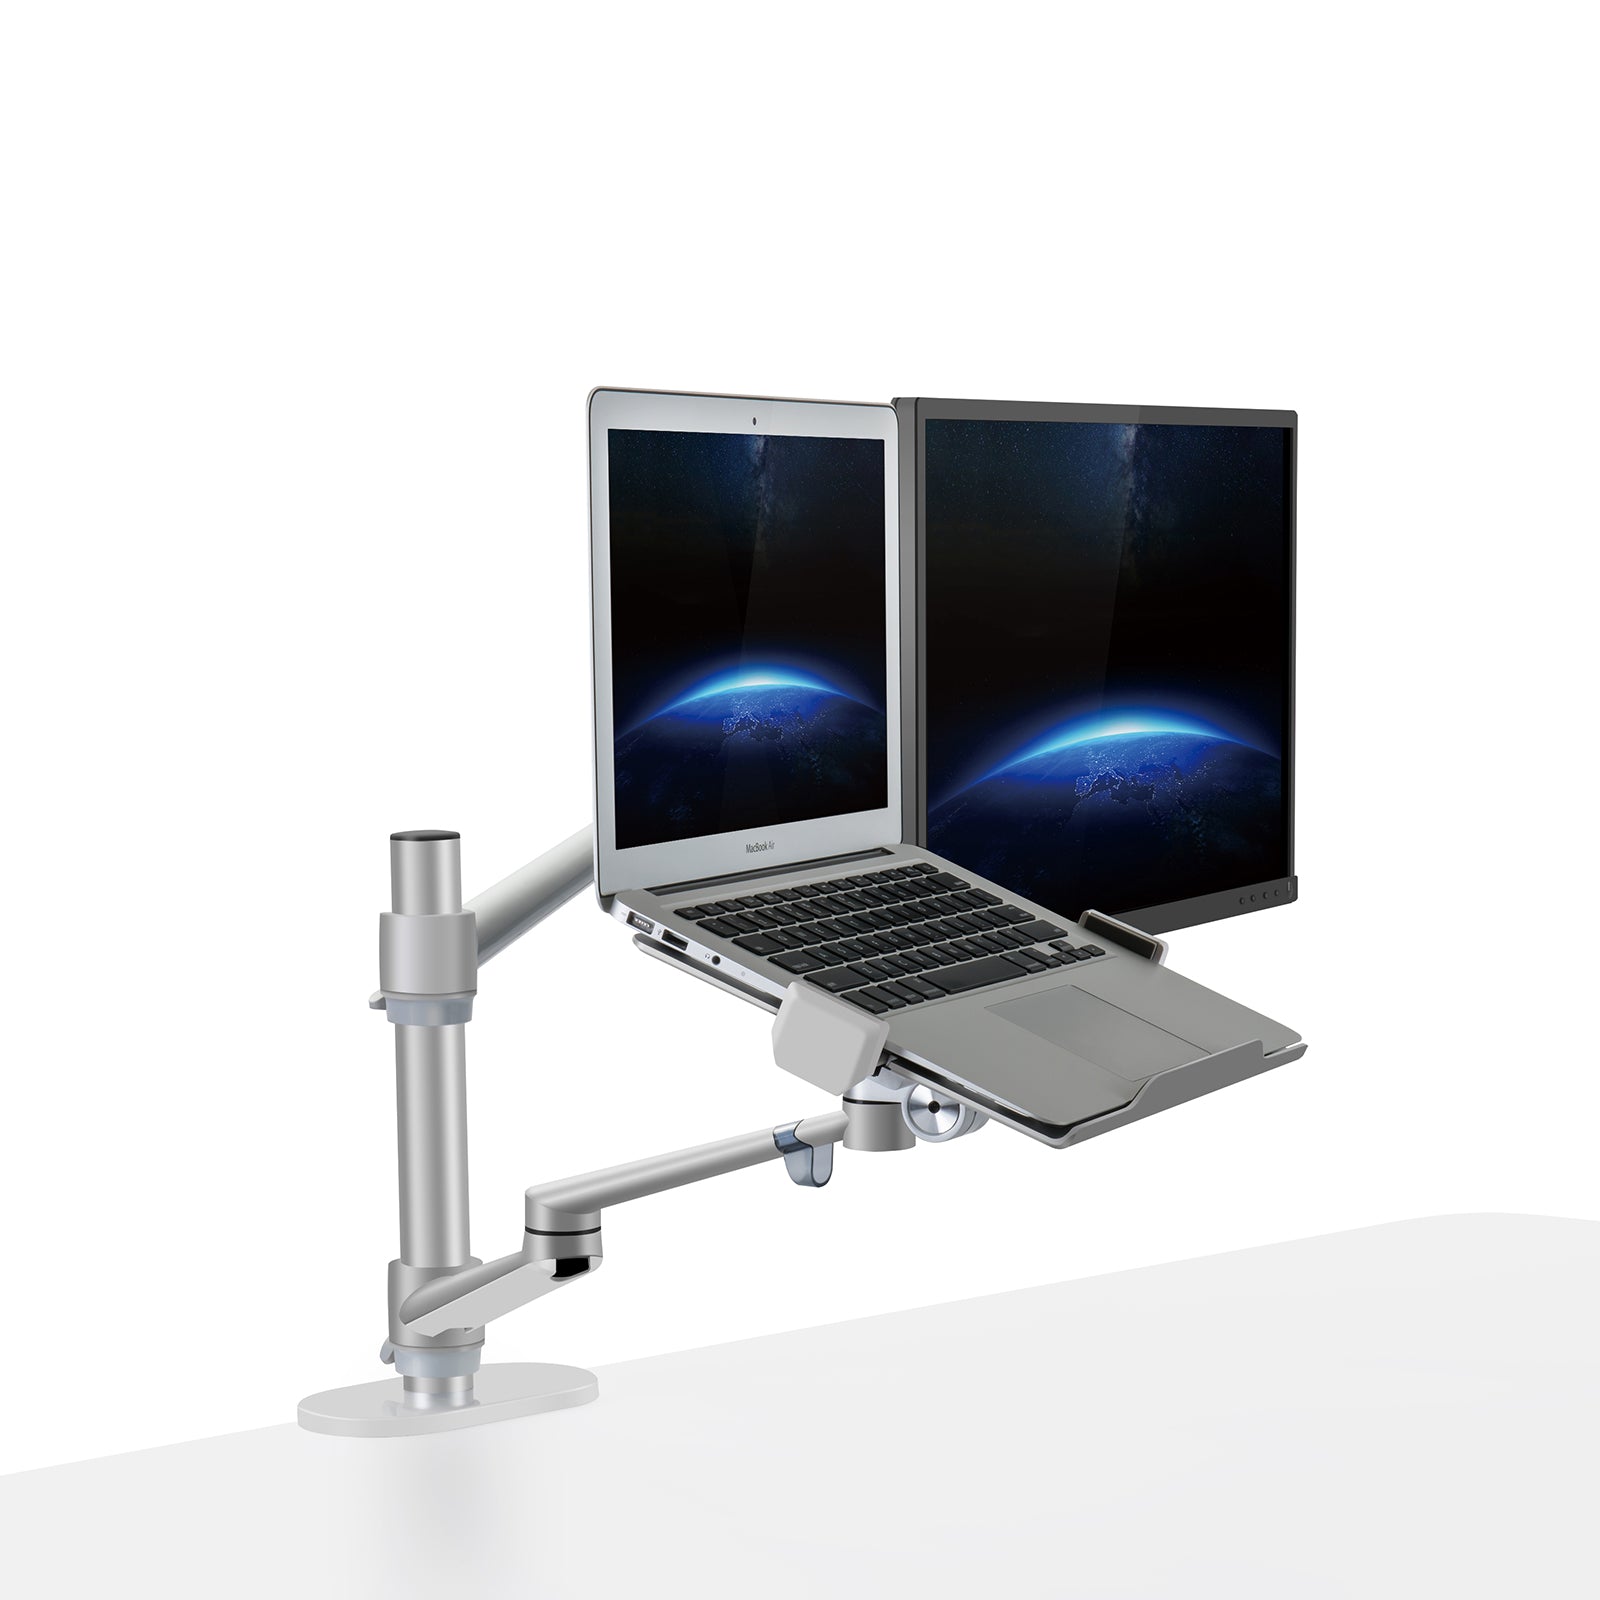 Aeons Monitor and Laptop Tray Desk Mount, 2-in-1 Adjustable Dual Arm fits 27 inch Screen with VESA, Clamp and Cable Management, Silver